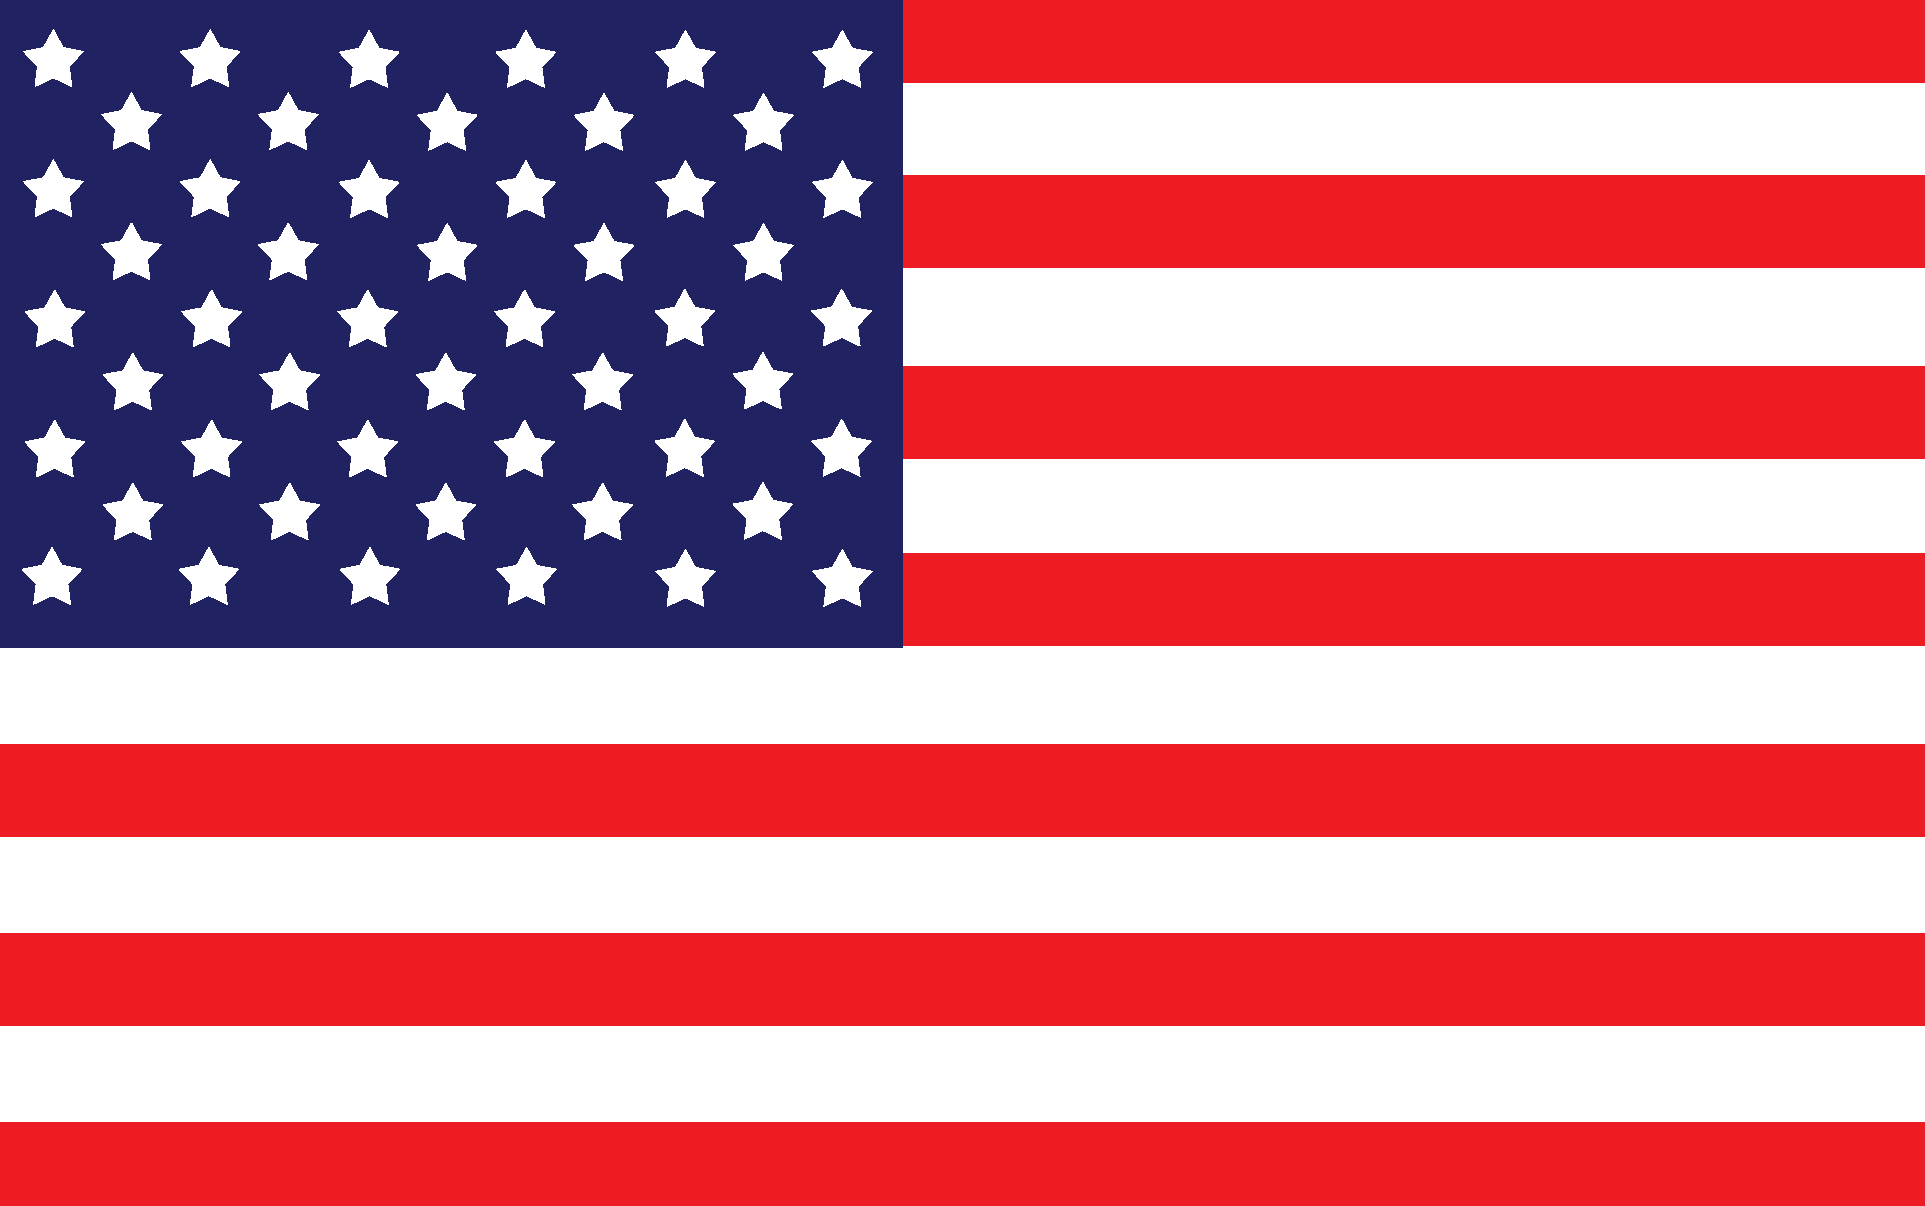 A flag of the united states with stars.